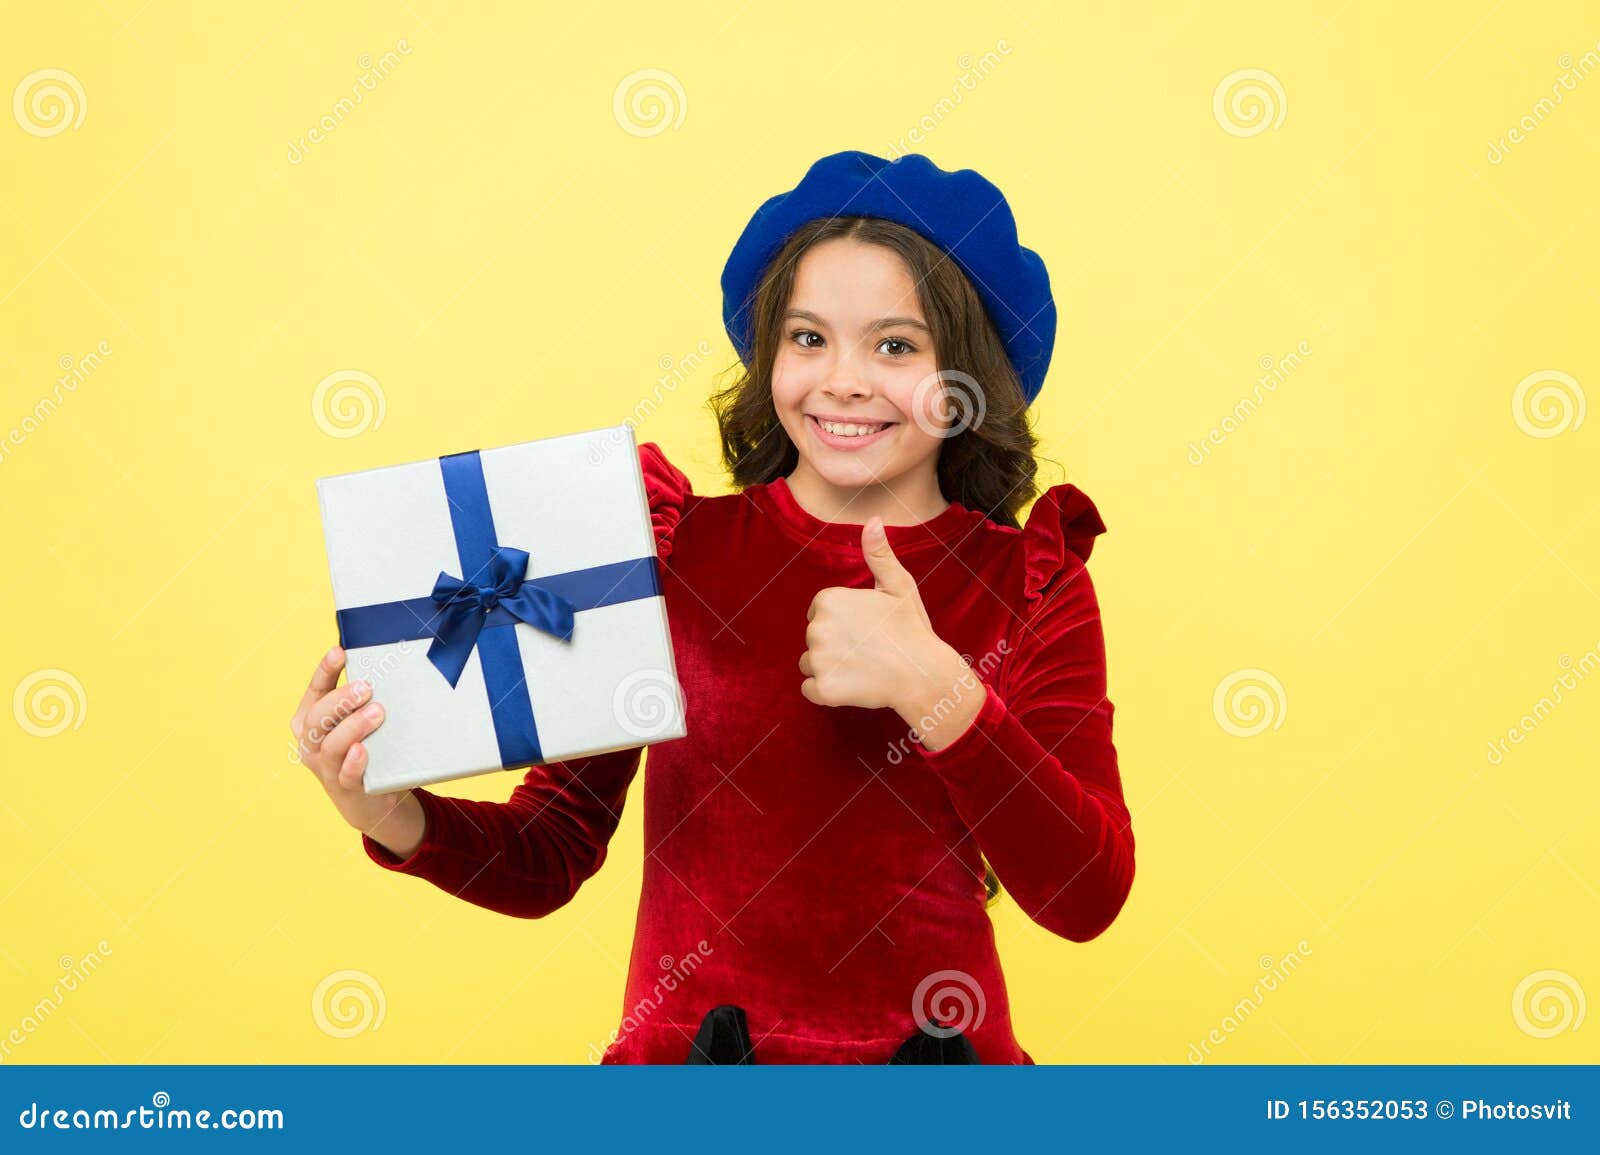 best present for kid